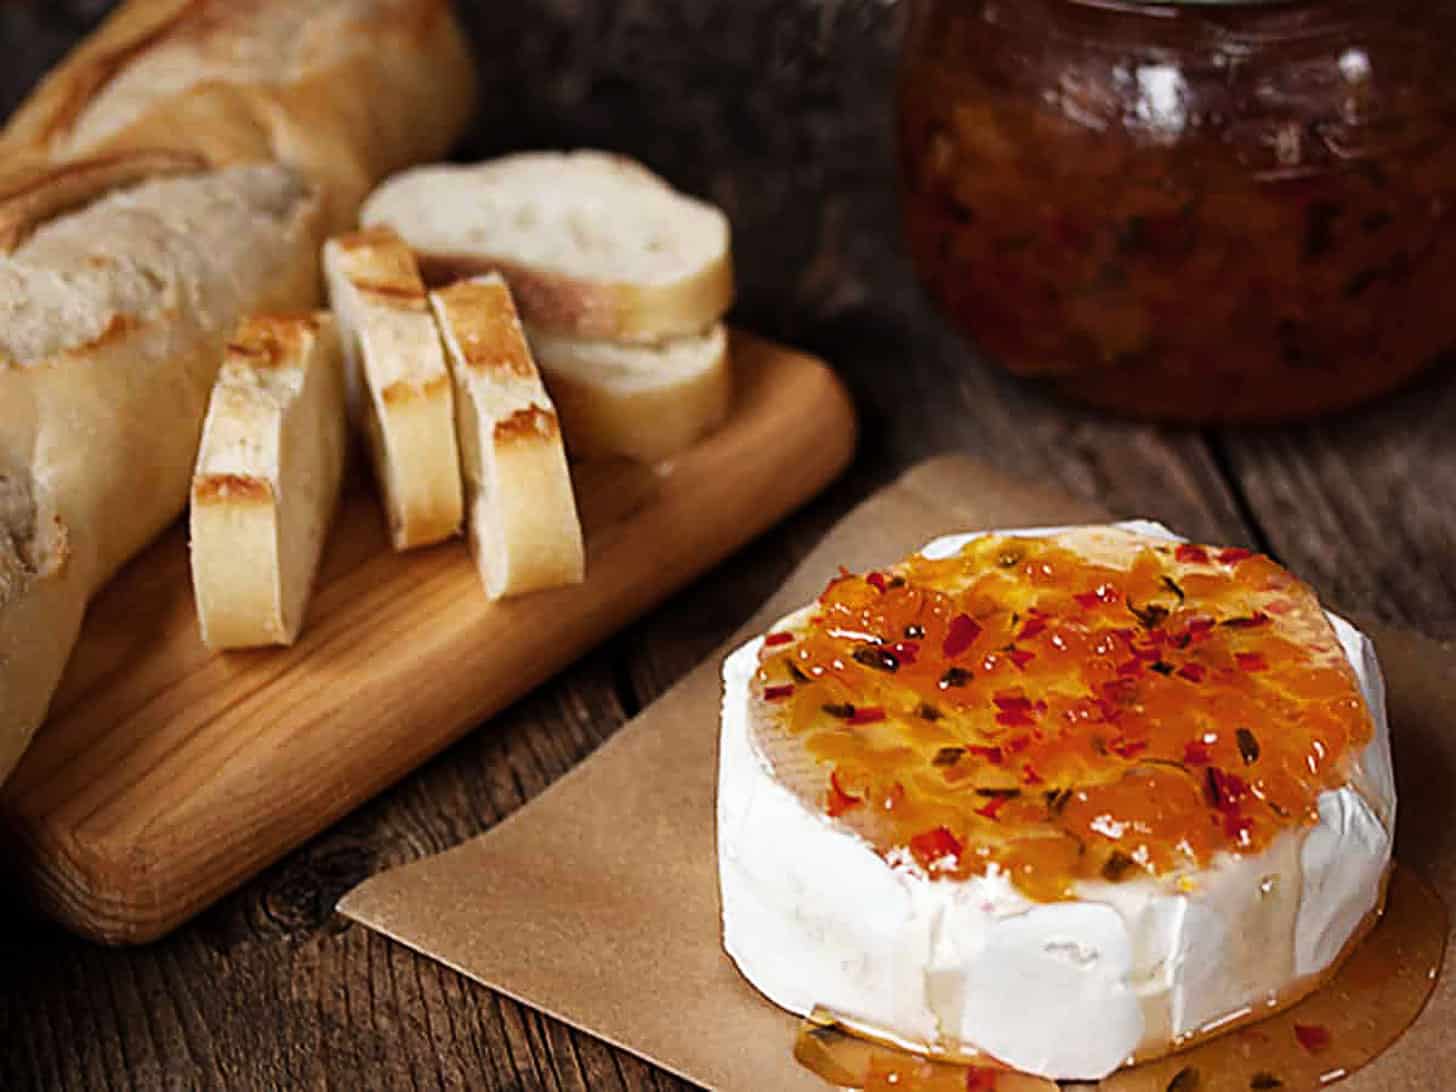 apricot jalapeño jelly on a round of bread with bread slices